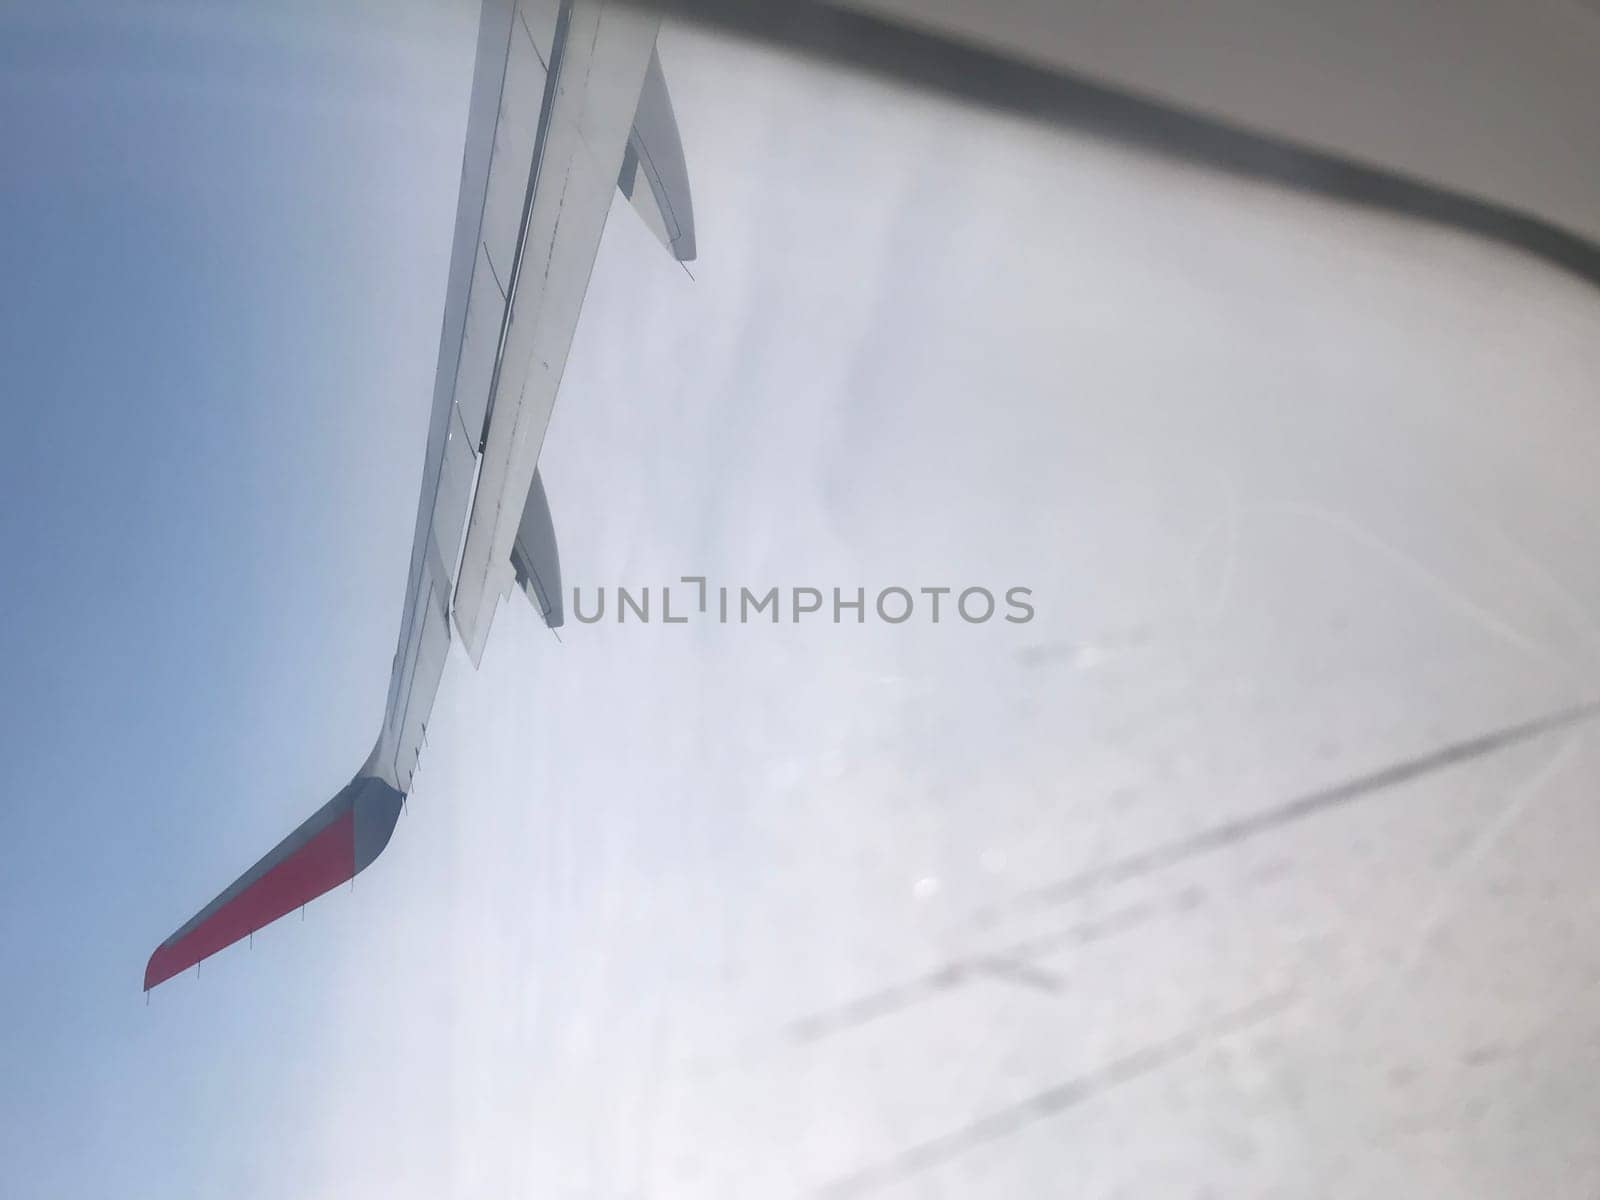 View of an airplane wing through the cabin window against a bright sky background